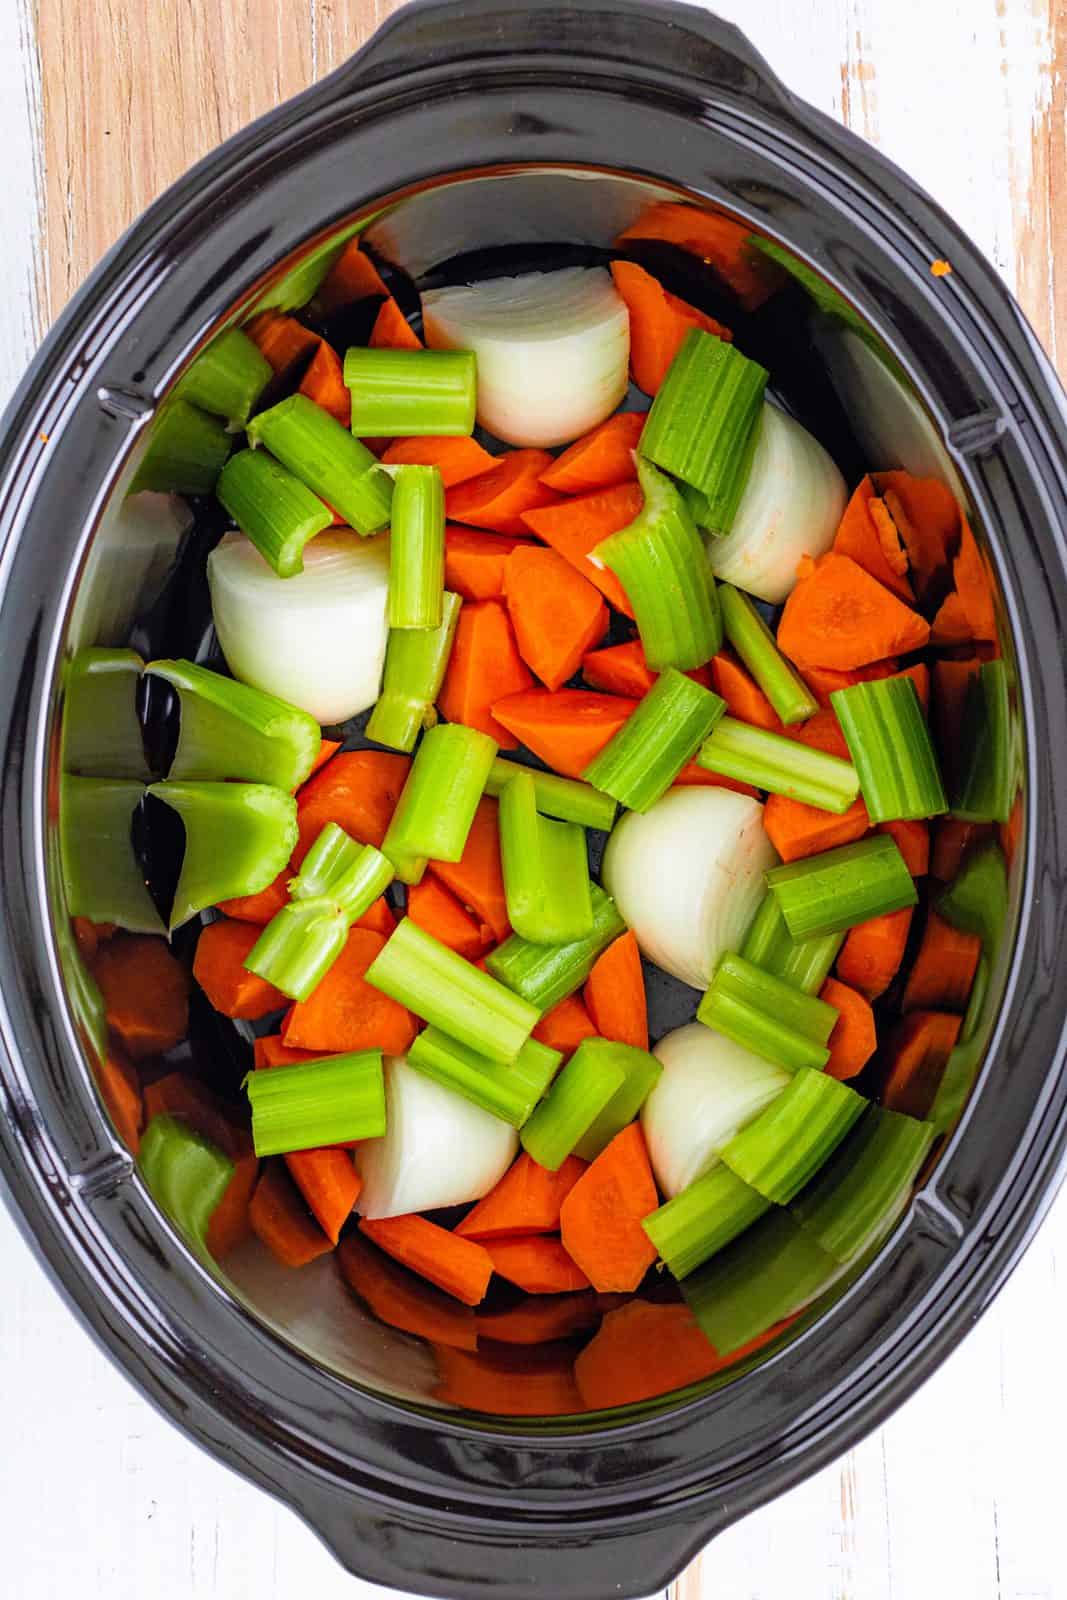 Chopped vegetables added to bottom of crock pot.